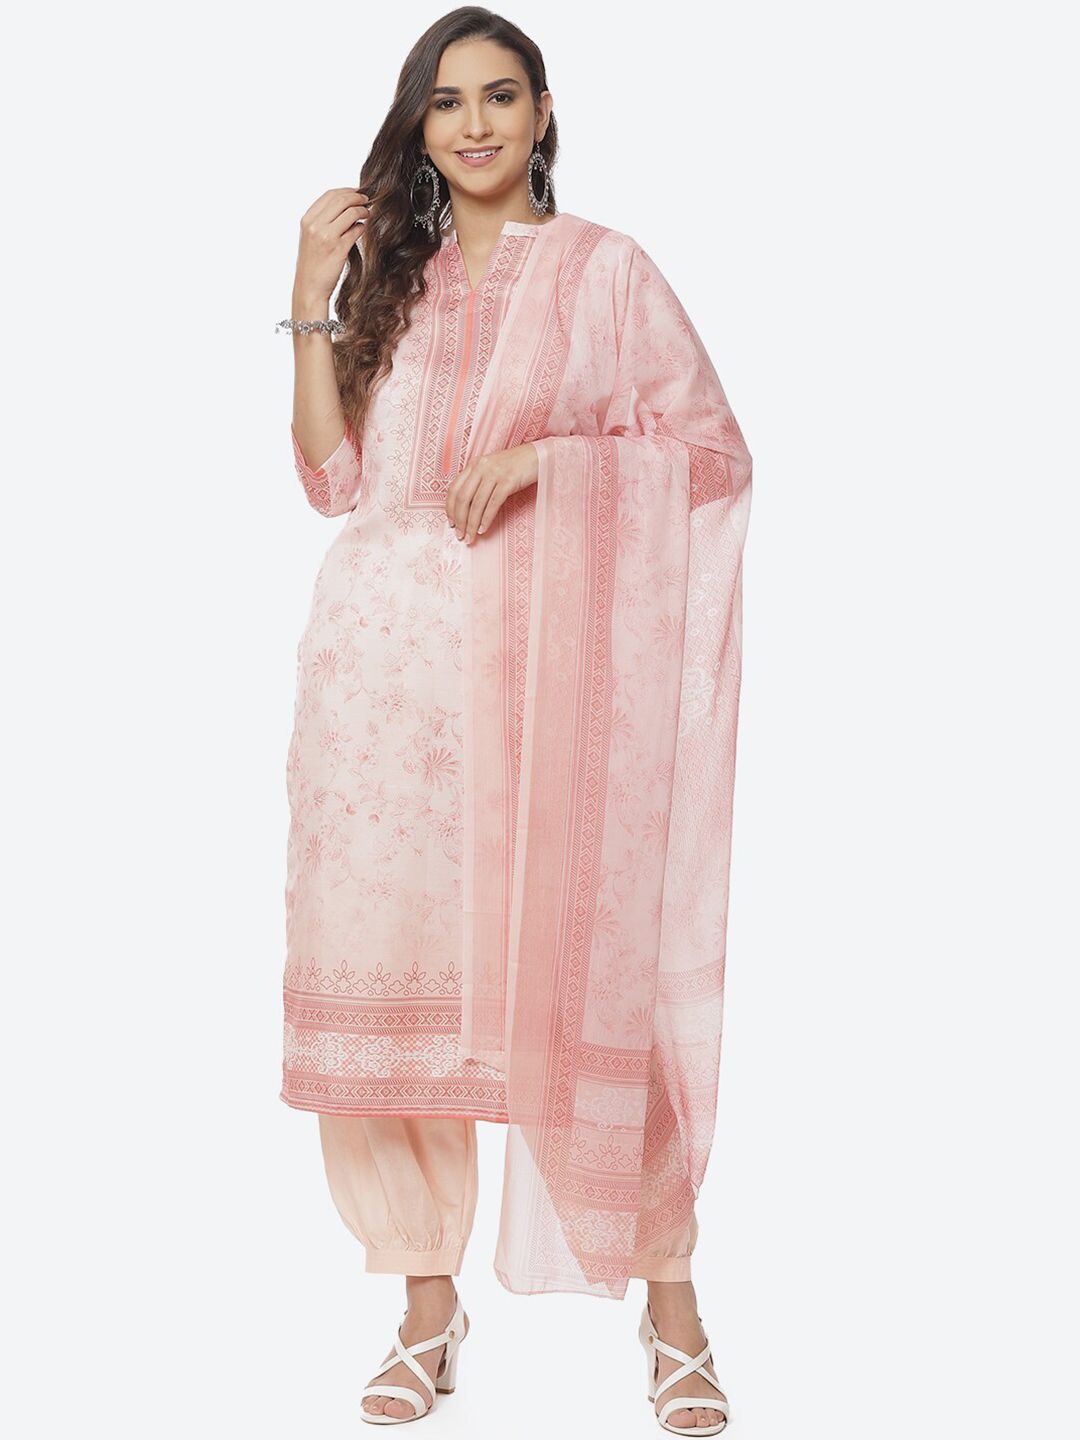 Biba Peach-Coloured & White Printed Unstitched Dress Material Price in India